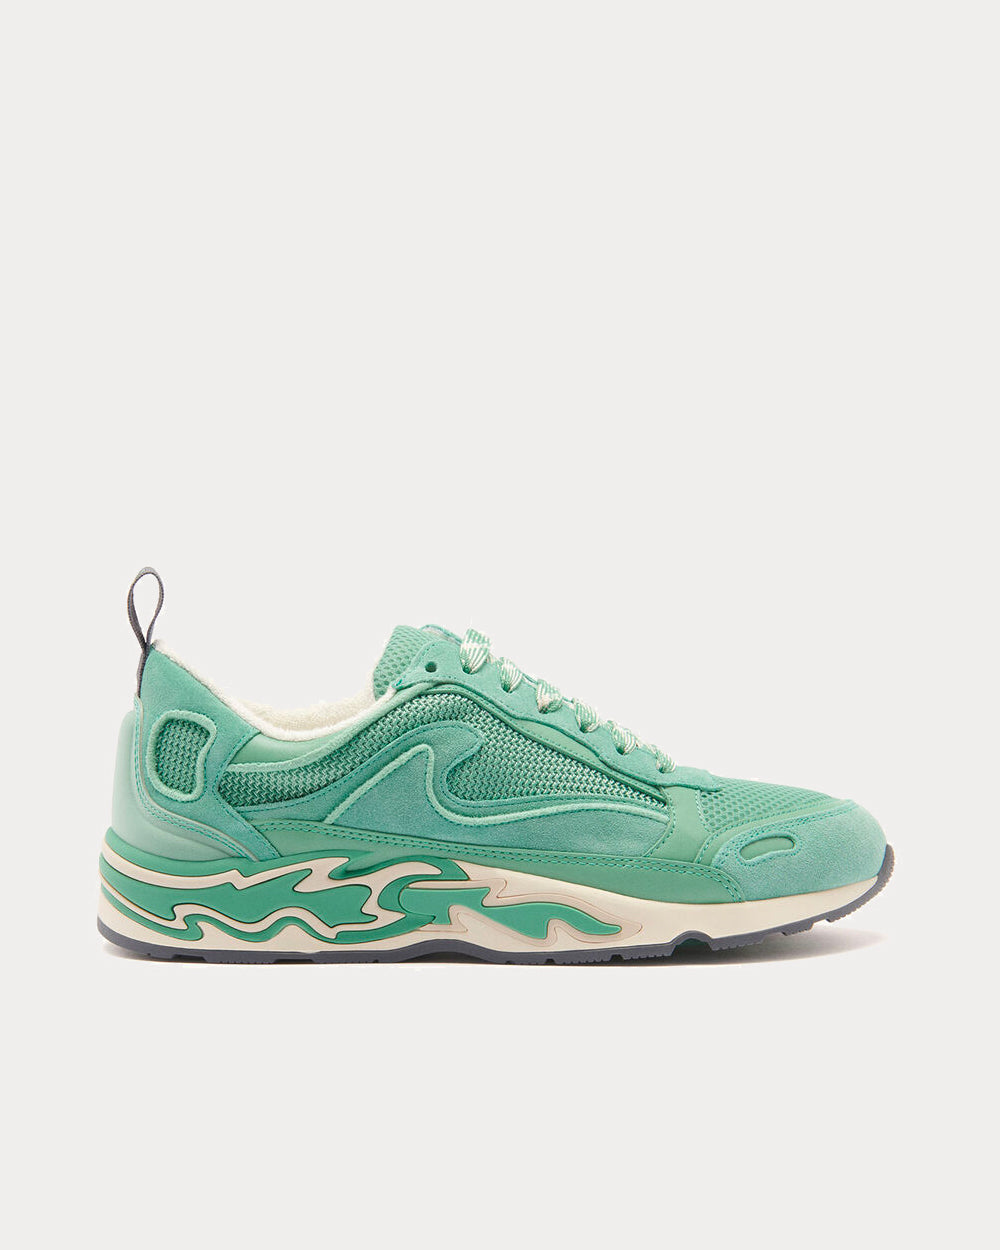 Sandro - Flame Mint Low Top Sneakers